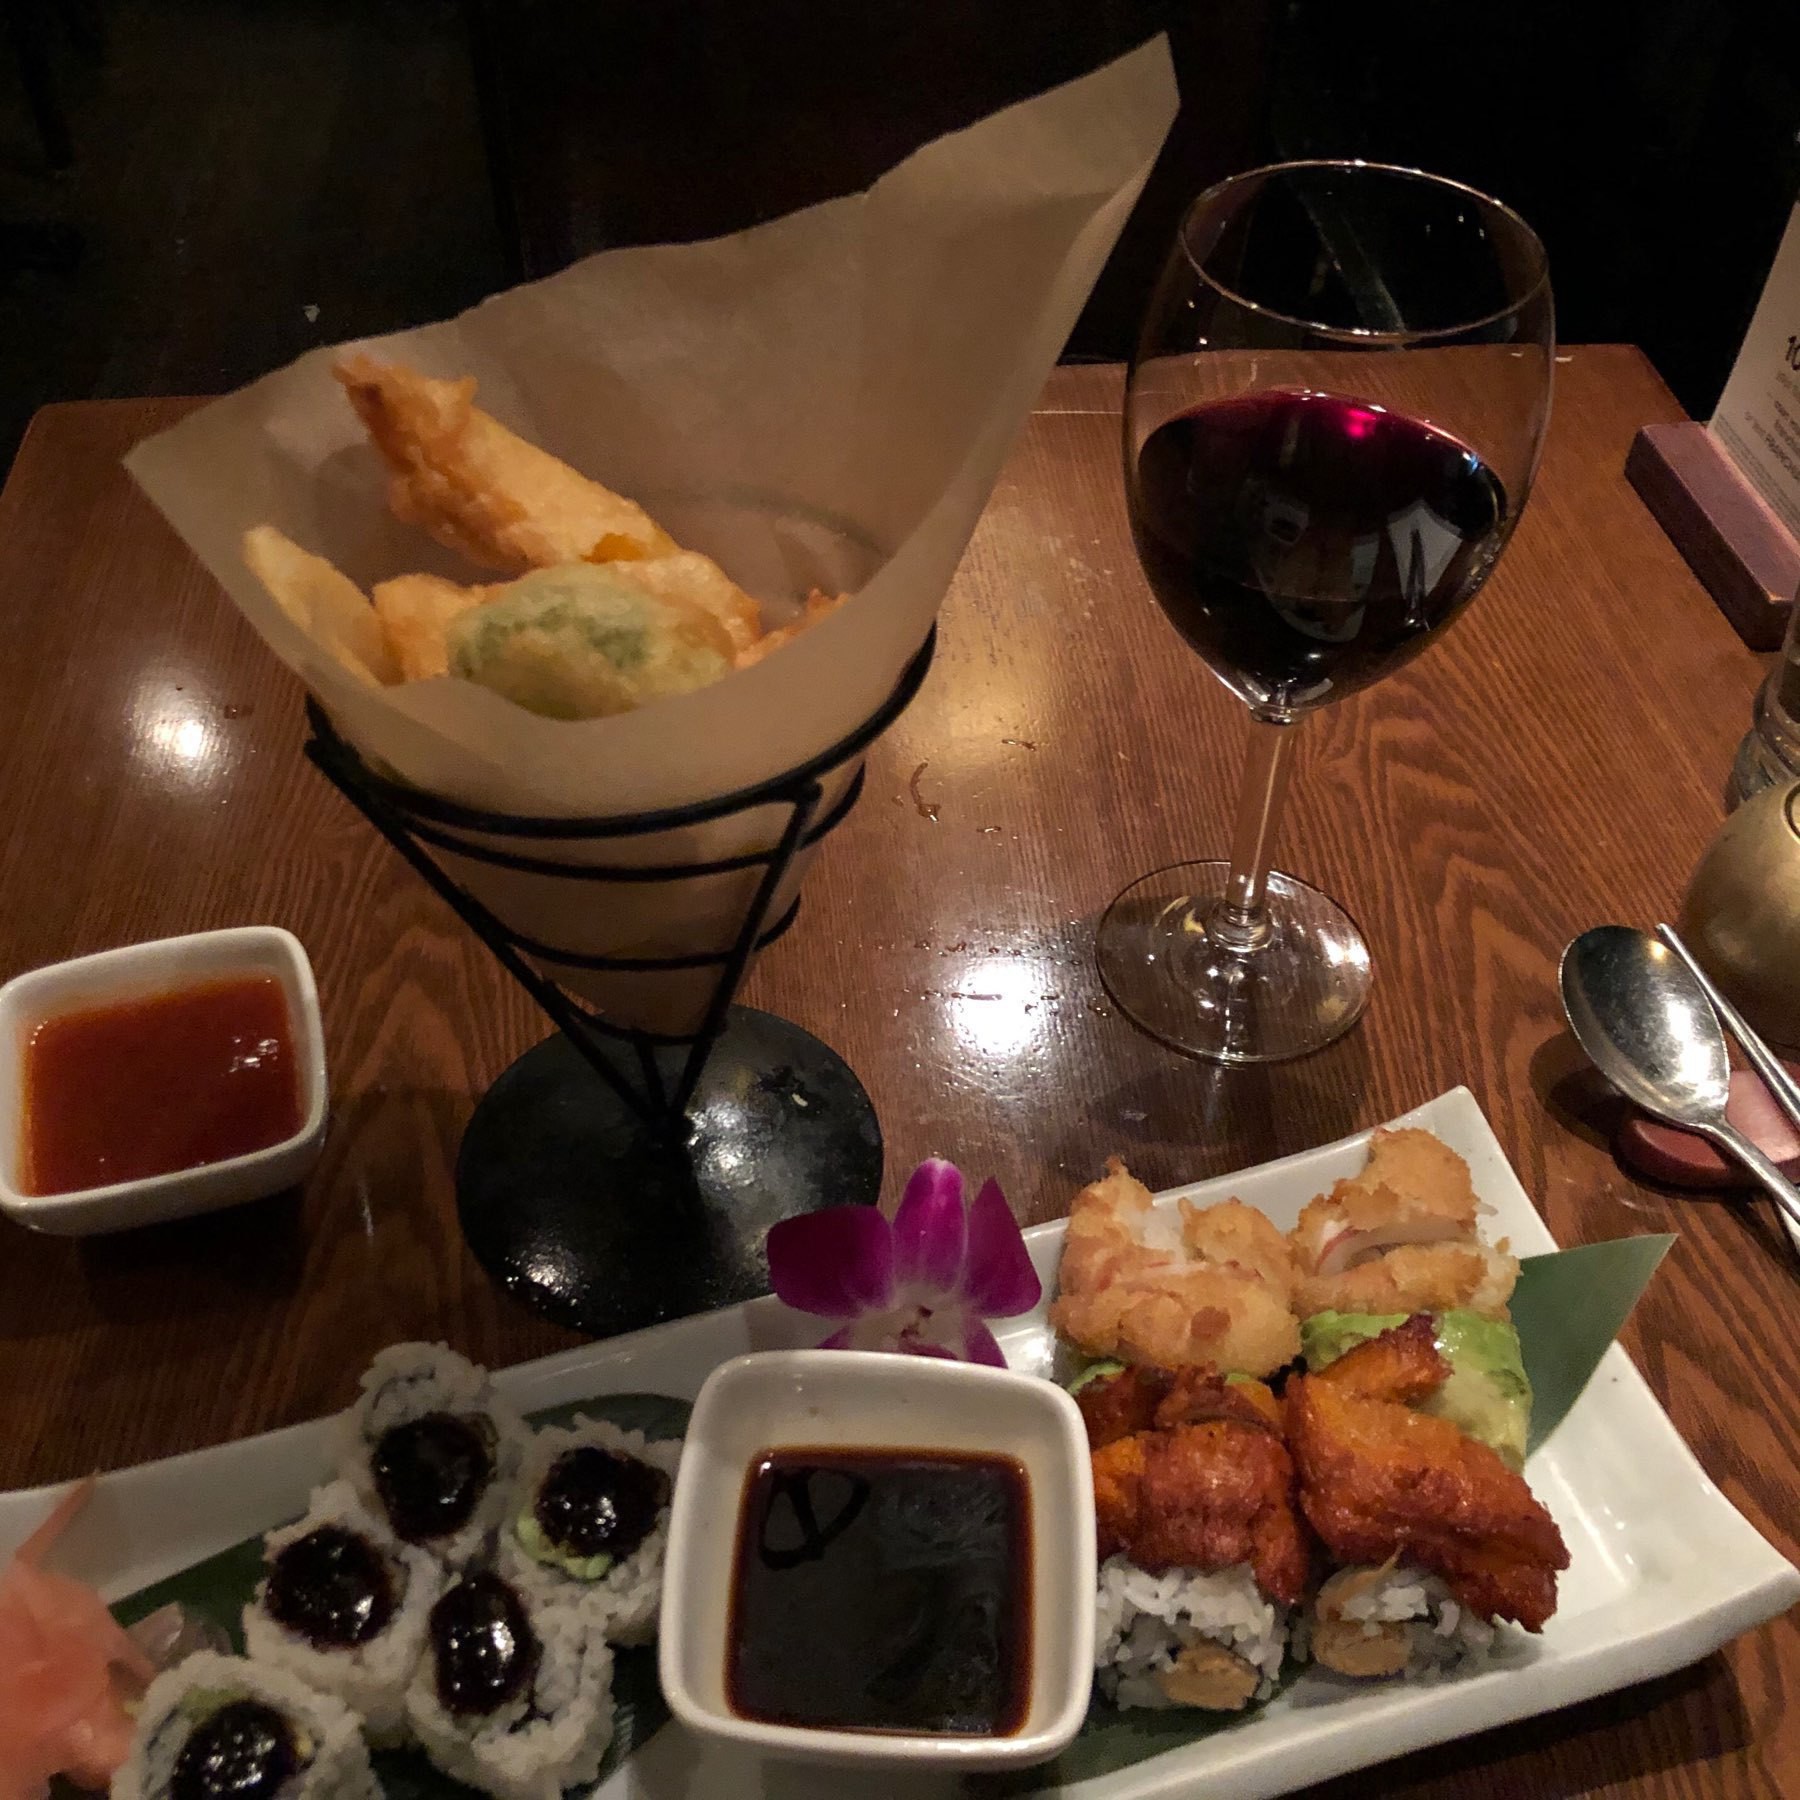 Platter eith vegatarian sushi, glass of red wine, and a cone filled with fried vegetables.